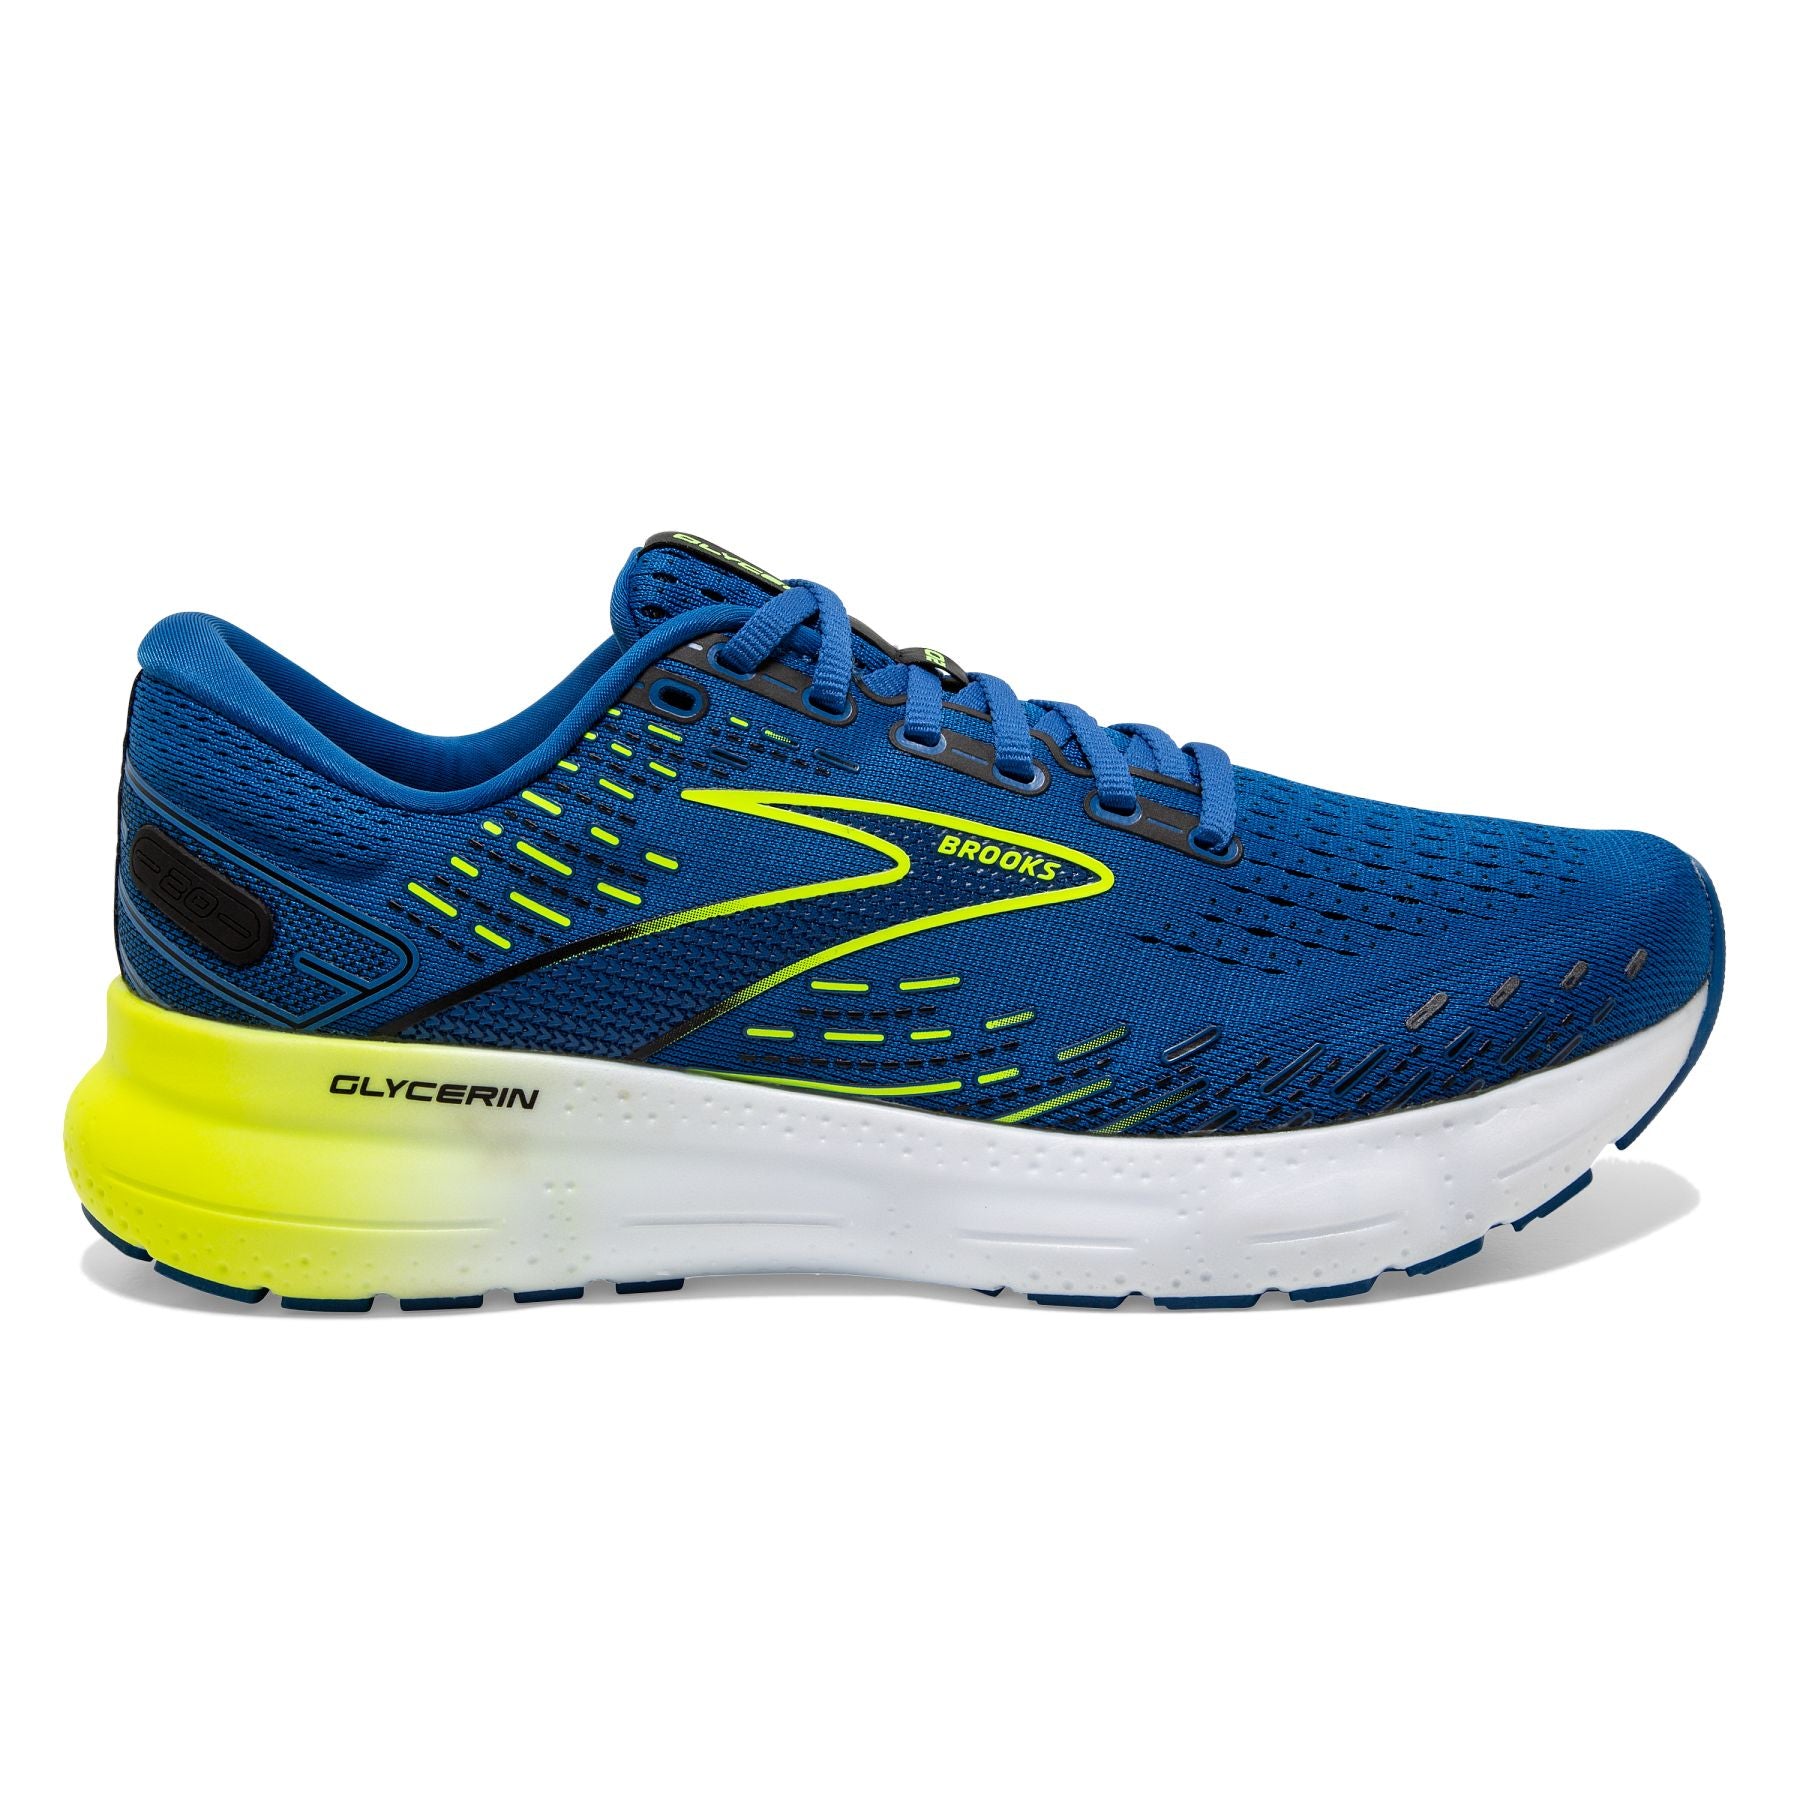 Lateral view of the Men's Glycerin 20 by BROOKS in the color Blue/Nightlife/White